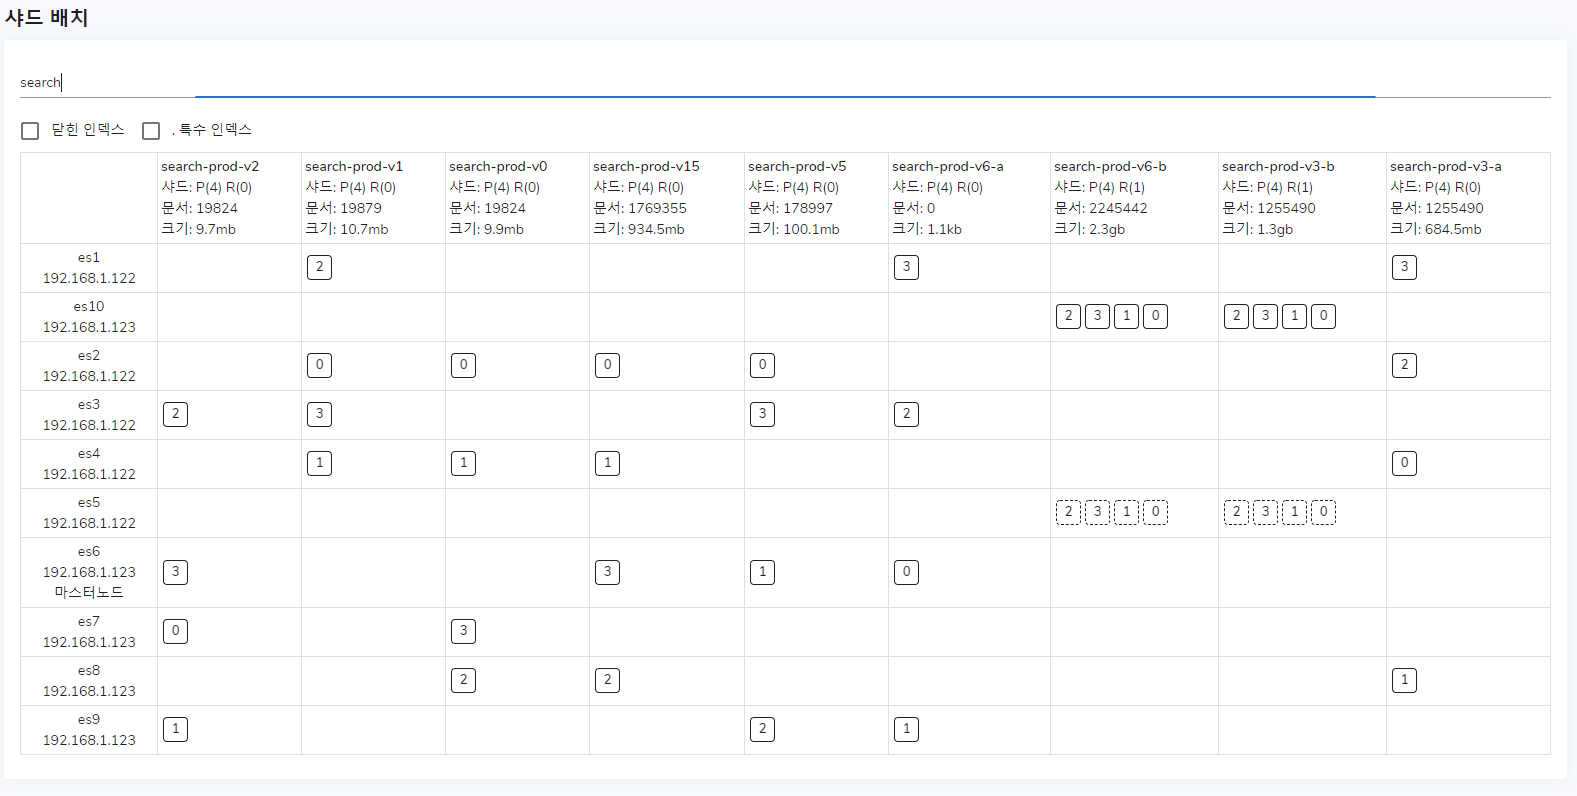 /images/2020-08-13-DSearch-Management-Tool-Usage-cluster/4.png